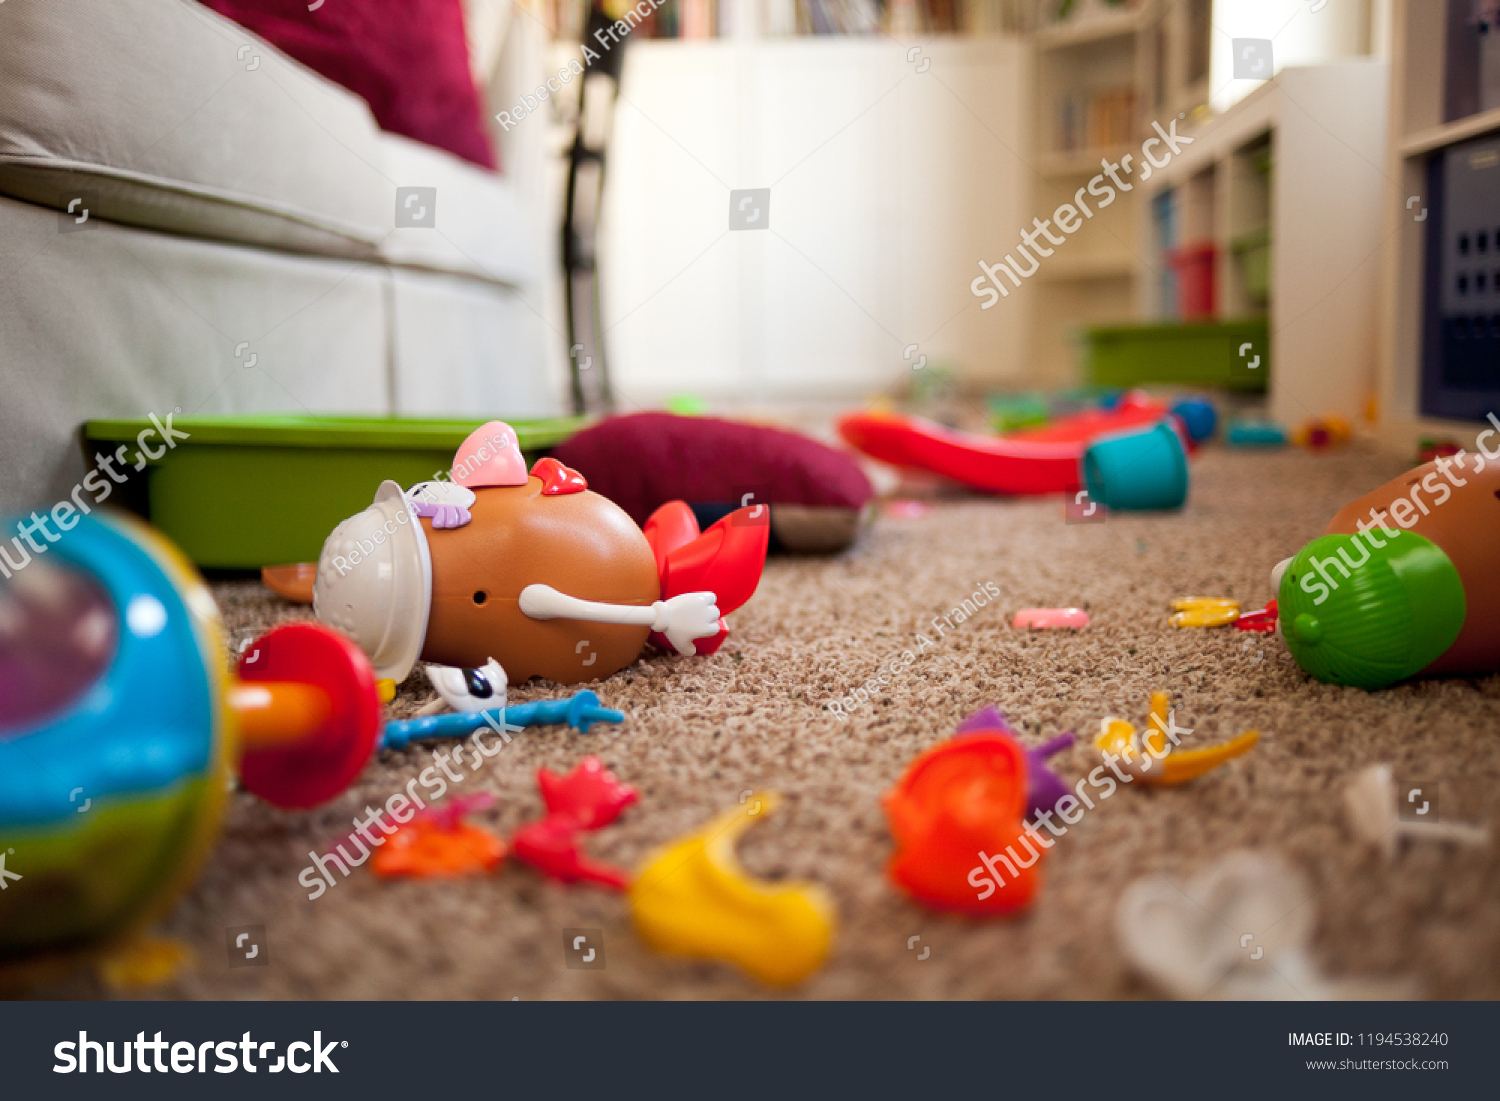 Messy Toy Room #1194538240